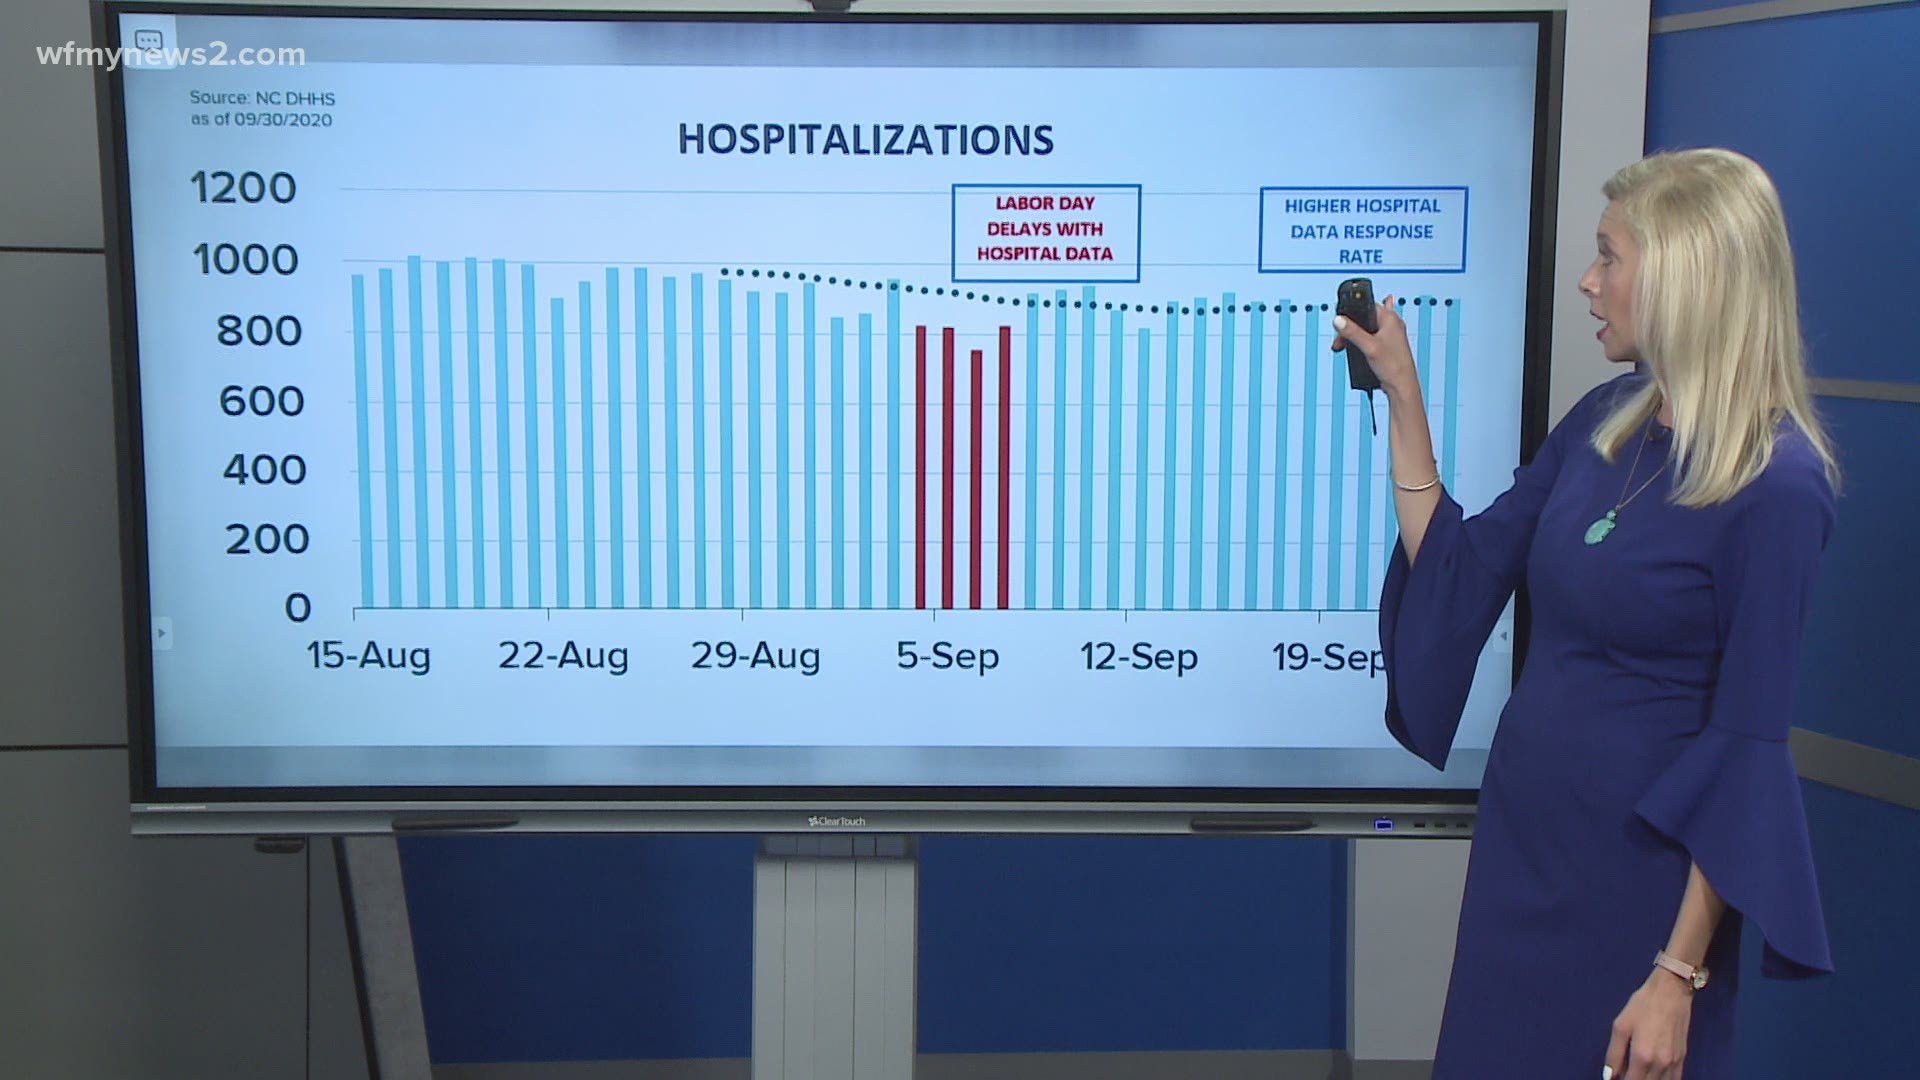 North Carolina moves into Phase 3 Friday, Oct. 2. Statewide hospitalizations hold steady, but local intakes increased.